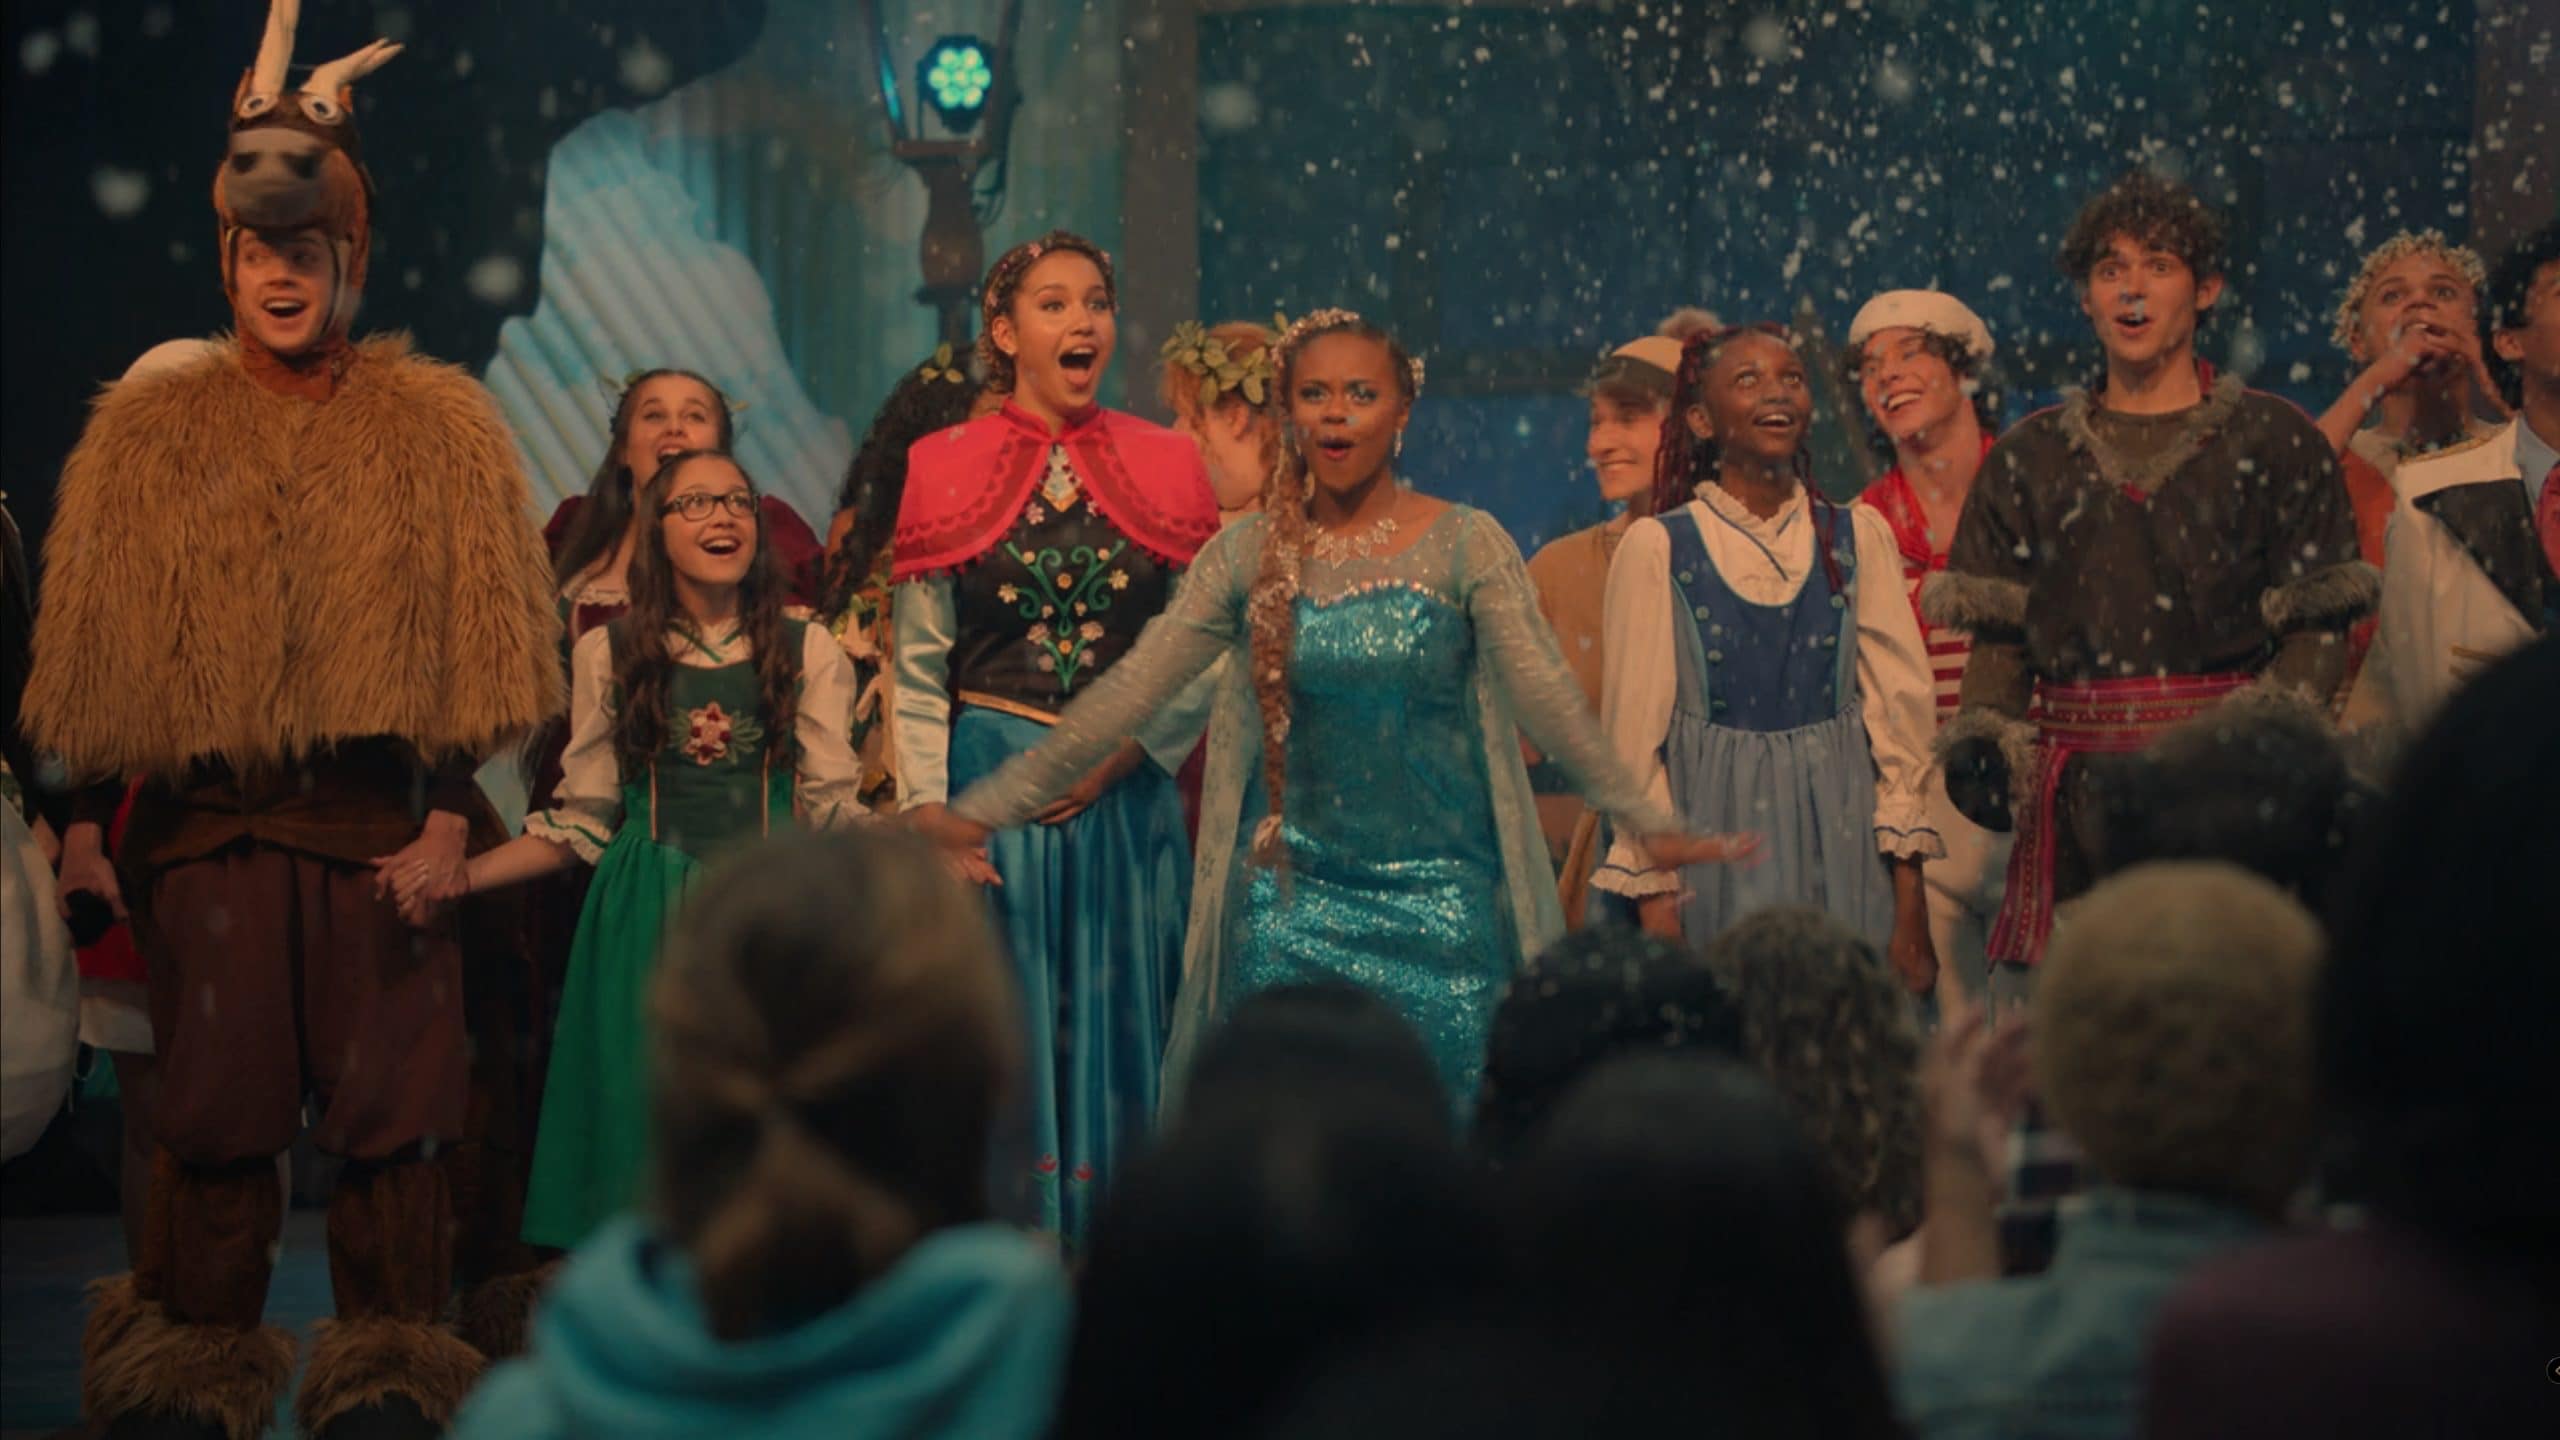 The Cast of Frozen taking their bow